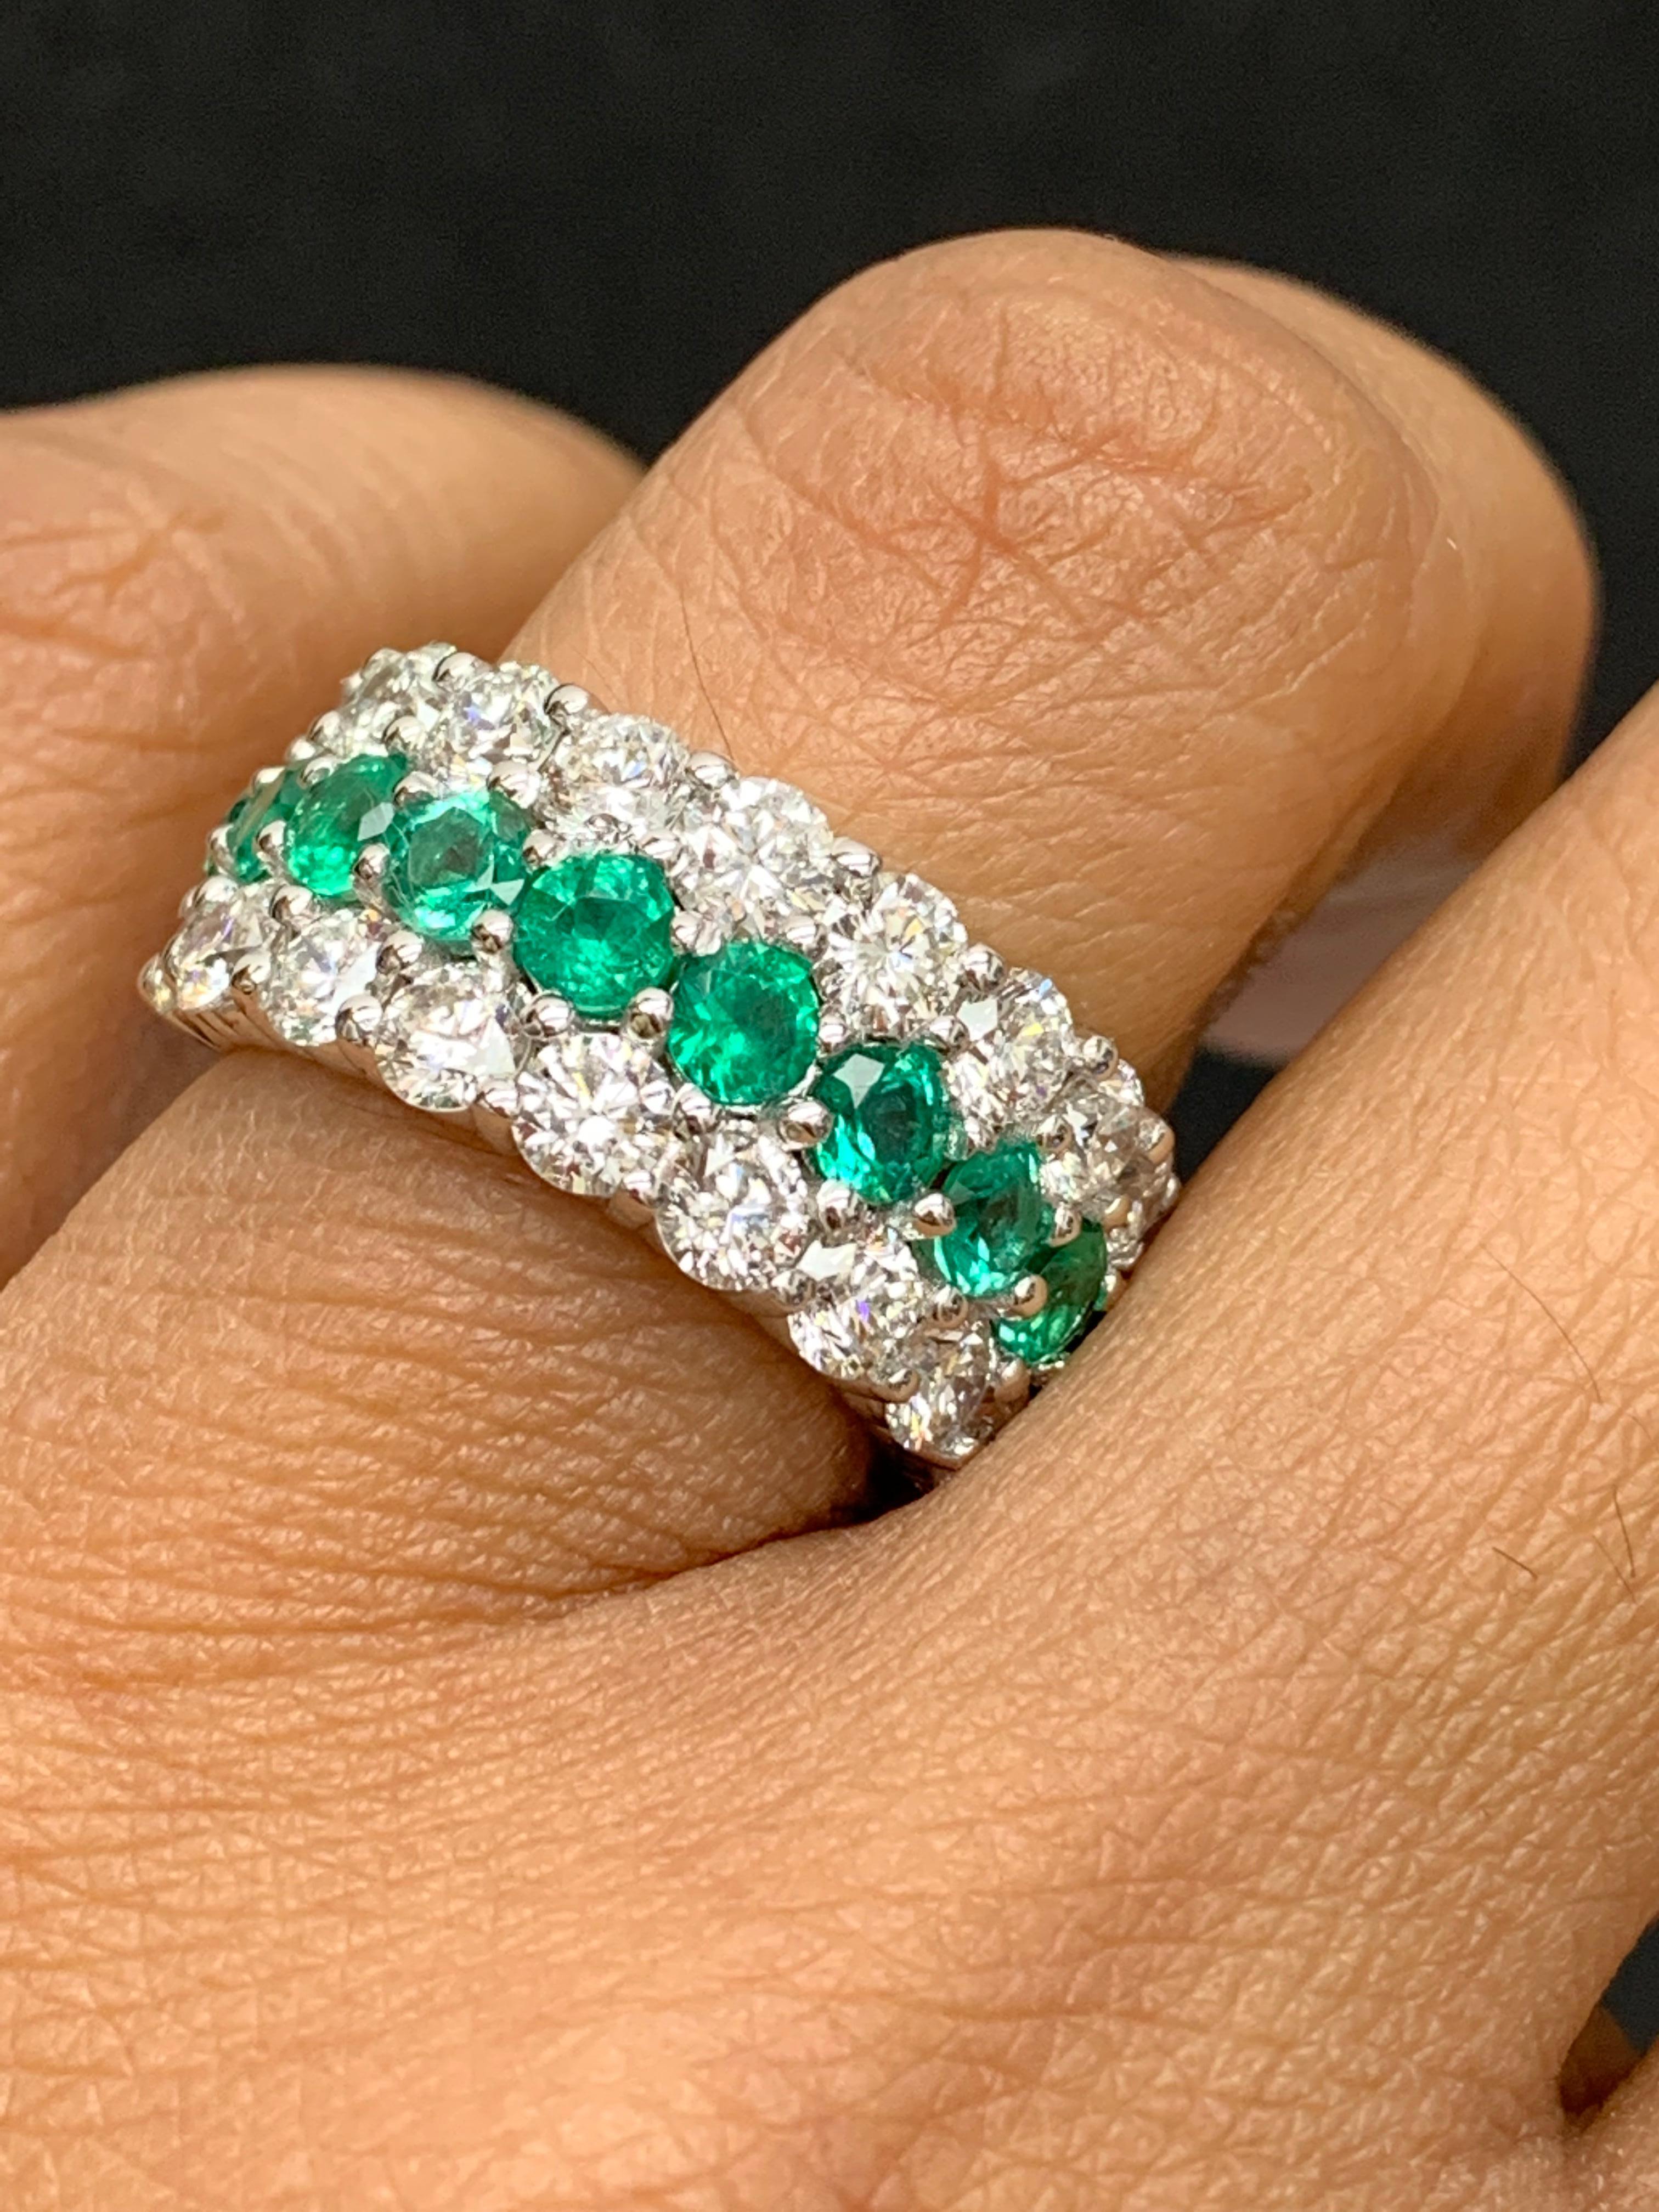 A unique and fashionable ring showcasing two rows of round-shape 18 diamonds and one row of 10 emeralds in the middle, set in a band design. Emeralds weigh 1.29 carats and Diamonds weigh 2.70 carats total. A brilliant and masterfully-made